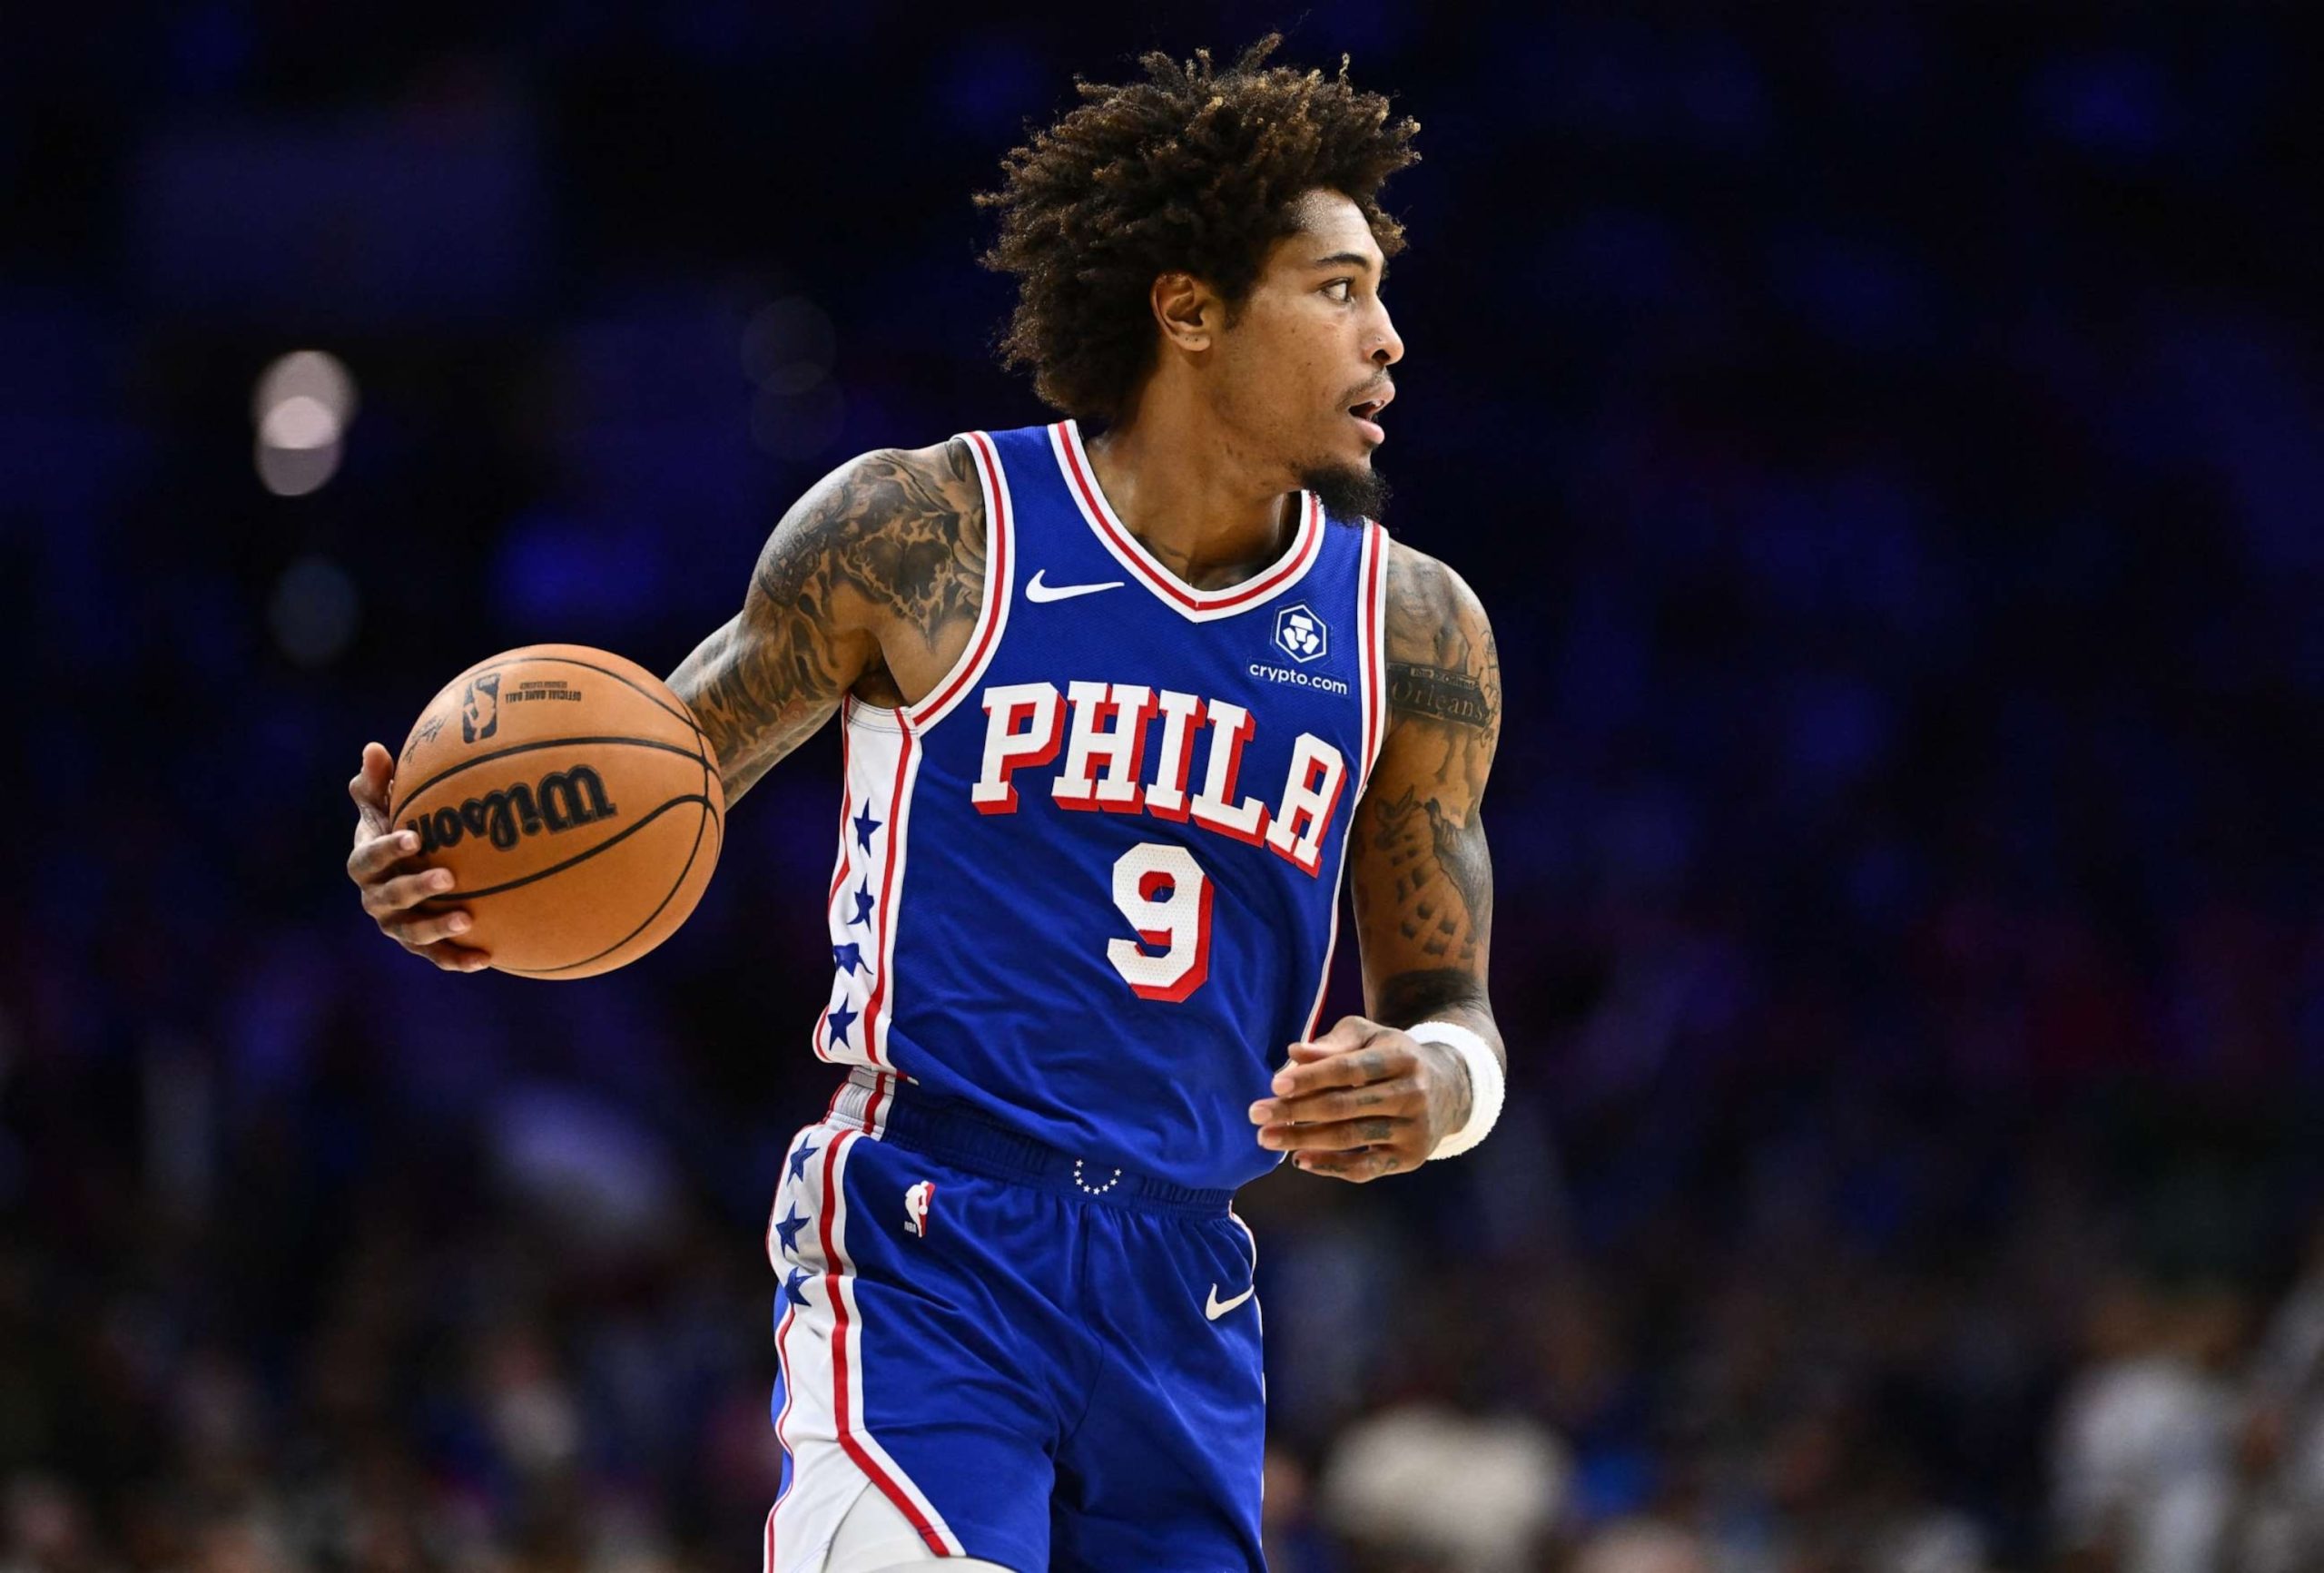 Kelly Oubre Jr., Philadelphia 76ers player, injured in hit-and-run accident